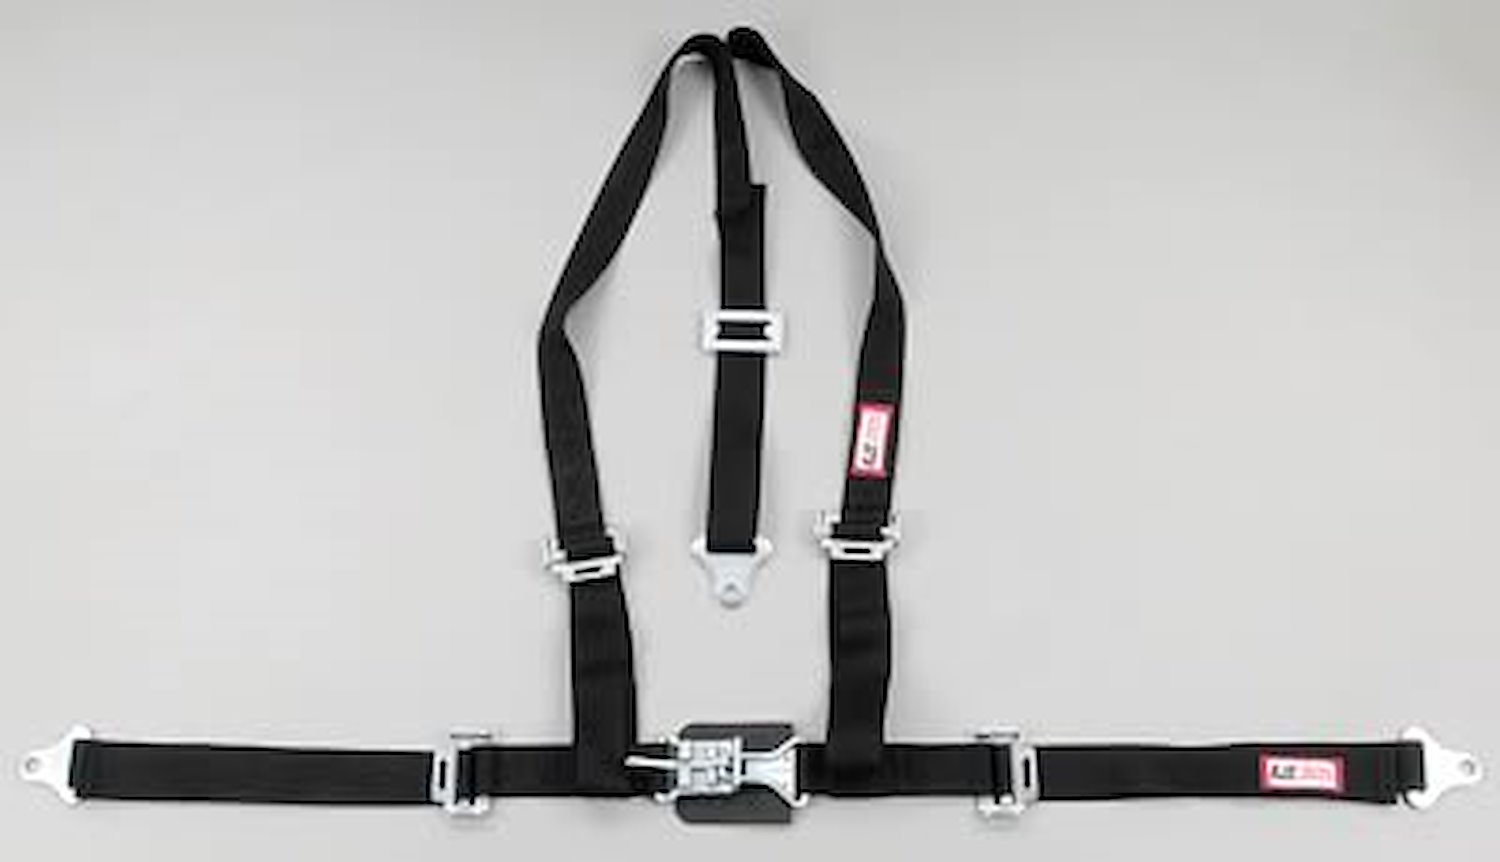 NON-SFI L&L HARNESS 3 PULL DOWN Lap Belt w/adjuster 2 S.H. Individual ROLL BAR Mount w/STERNUM STRAP ALL WRAP ENDS RED